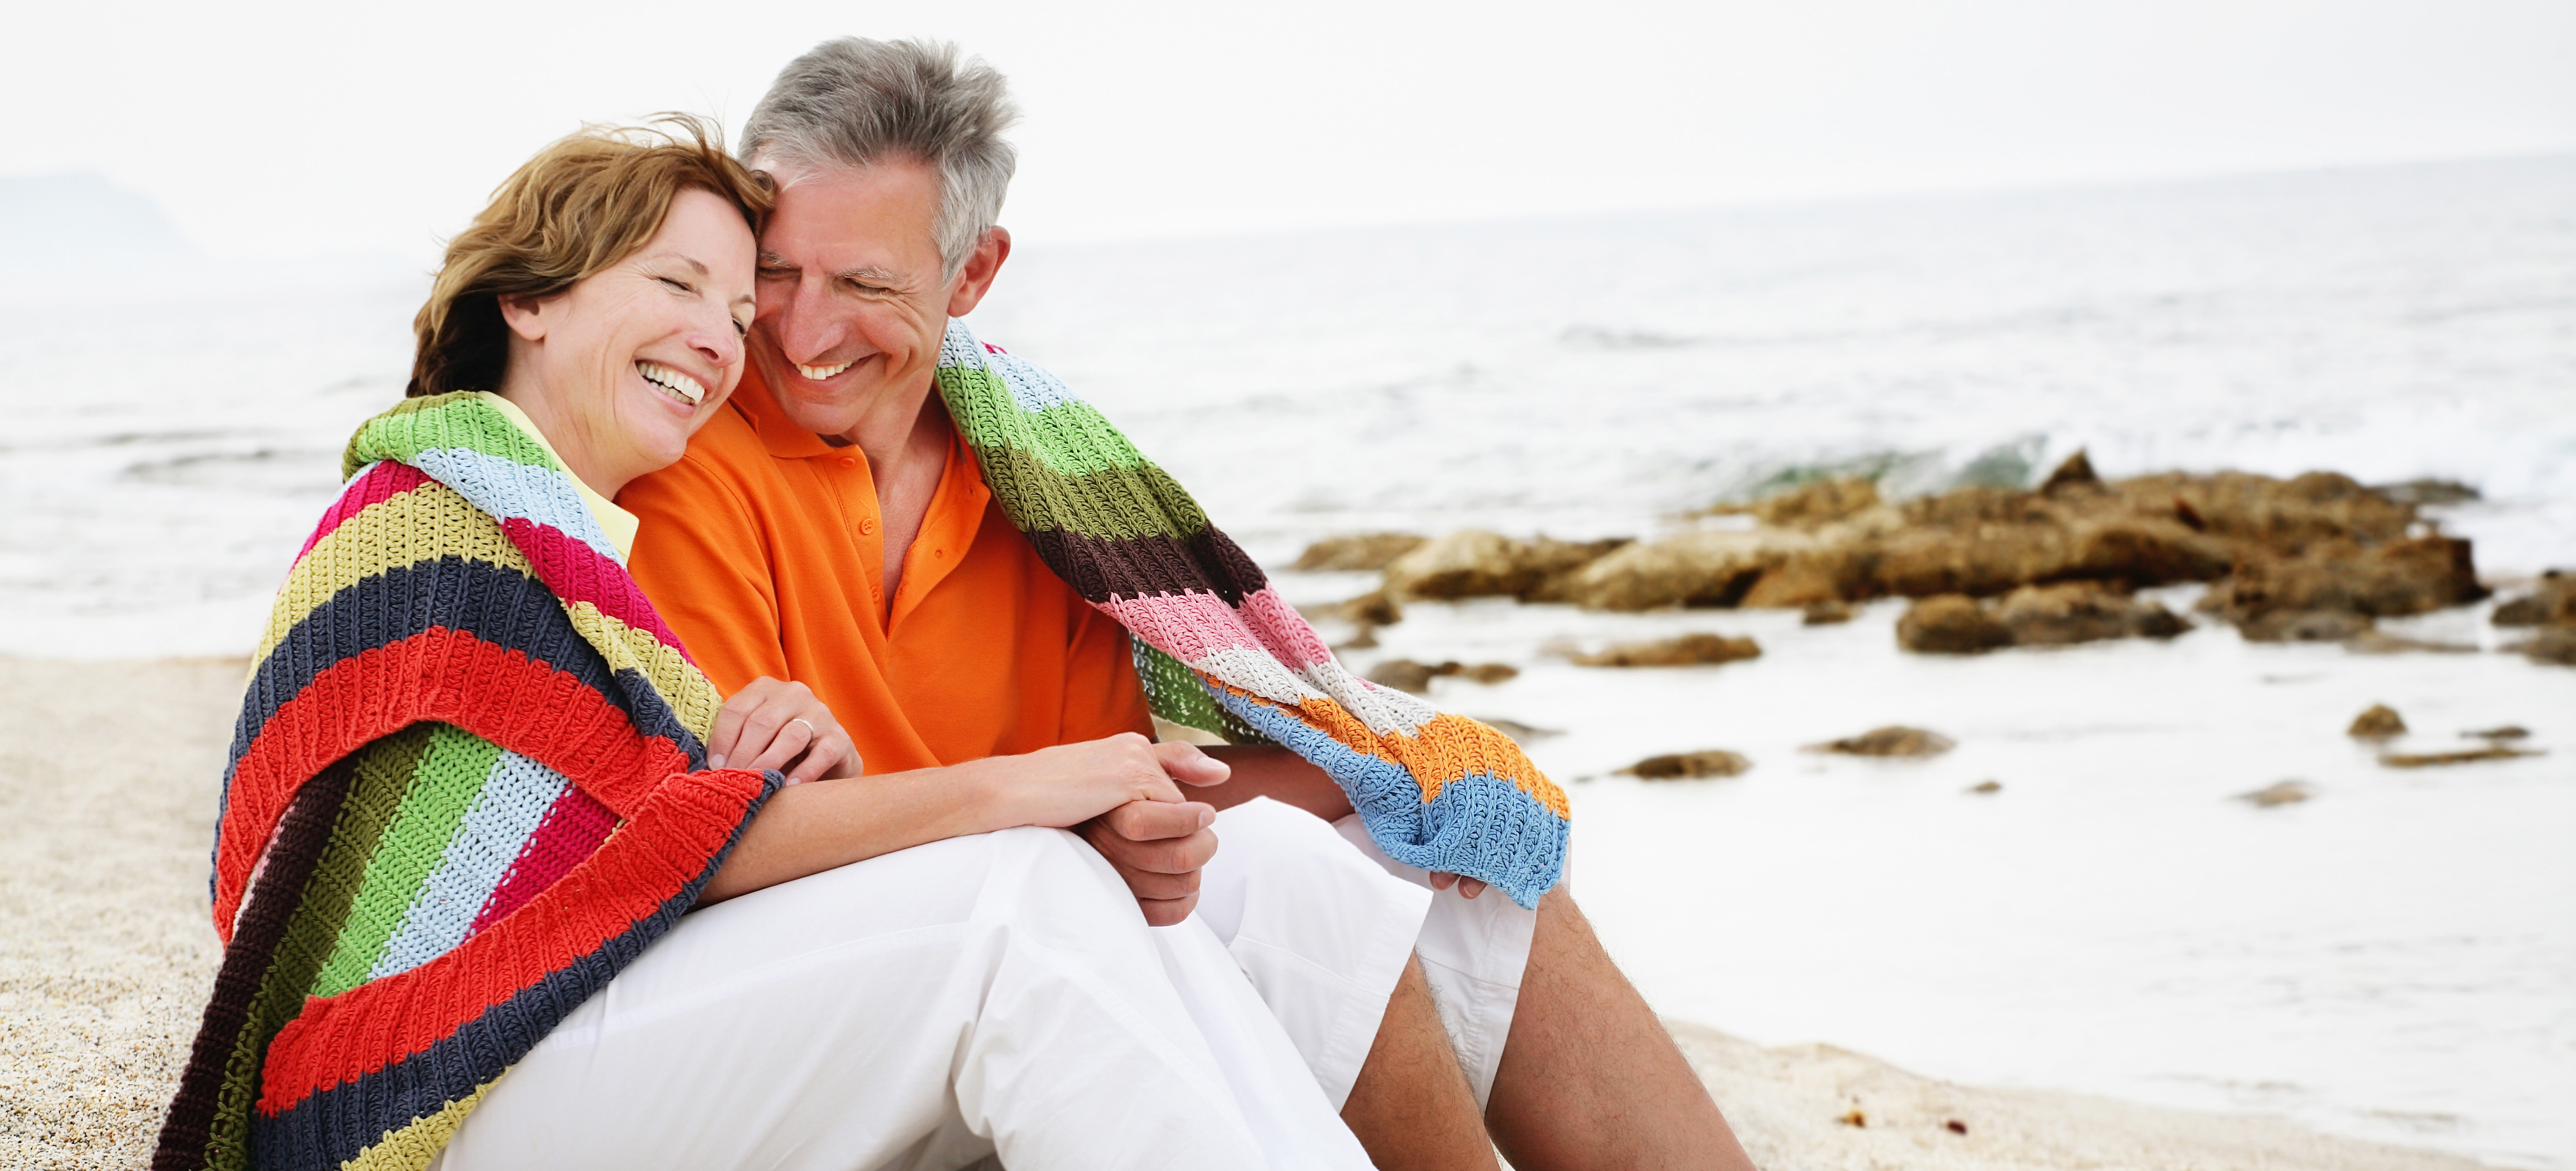 Middle-aged couple sitting on a beach enjoying each others company. 